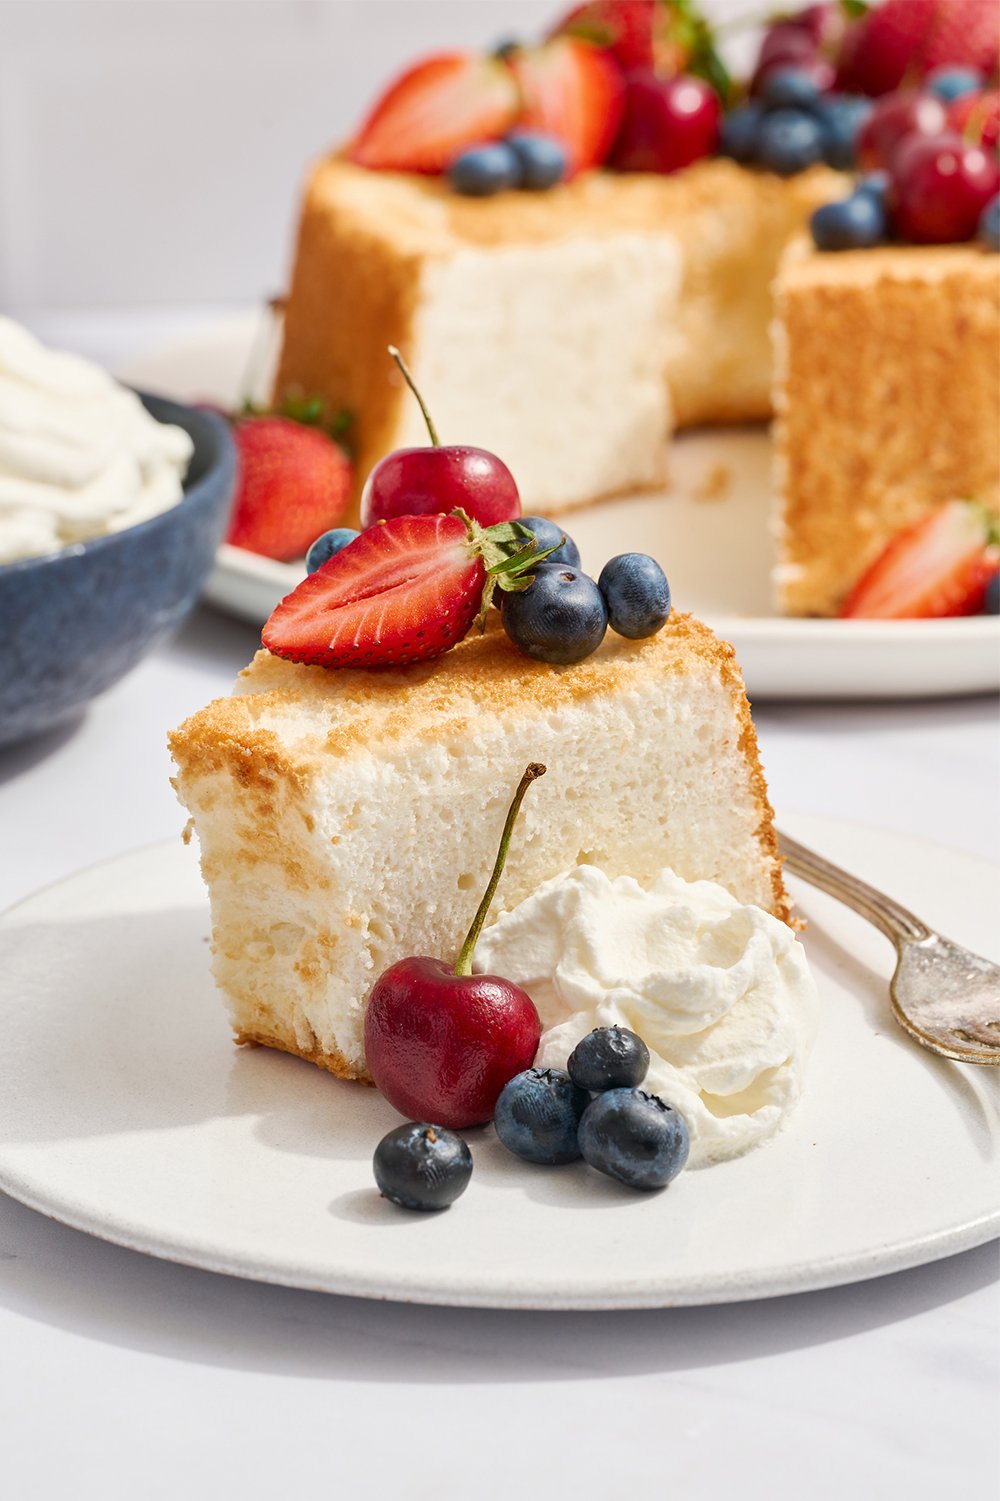 slice of cake on a plate with whipped cream and berries